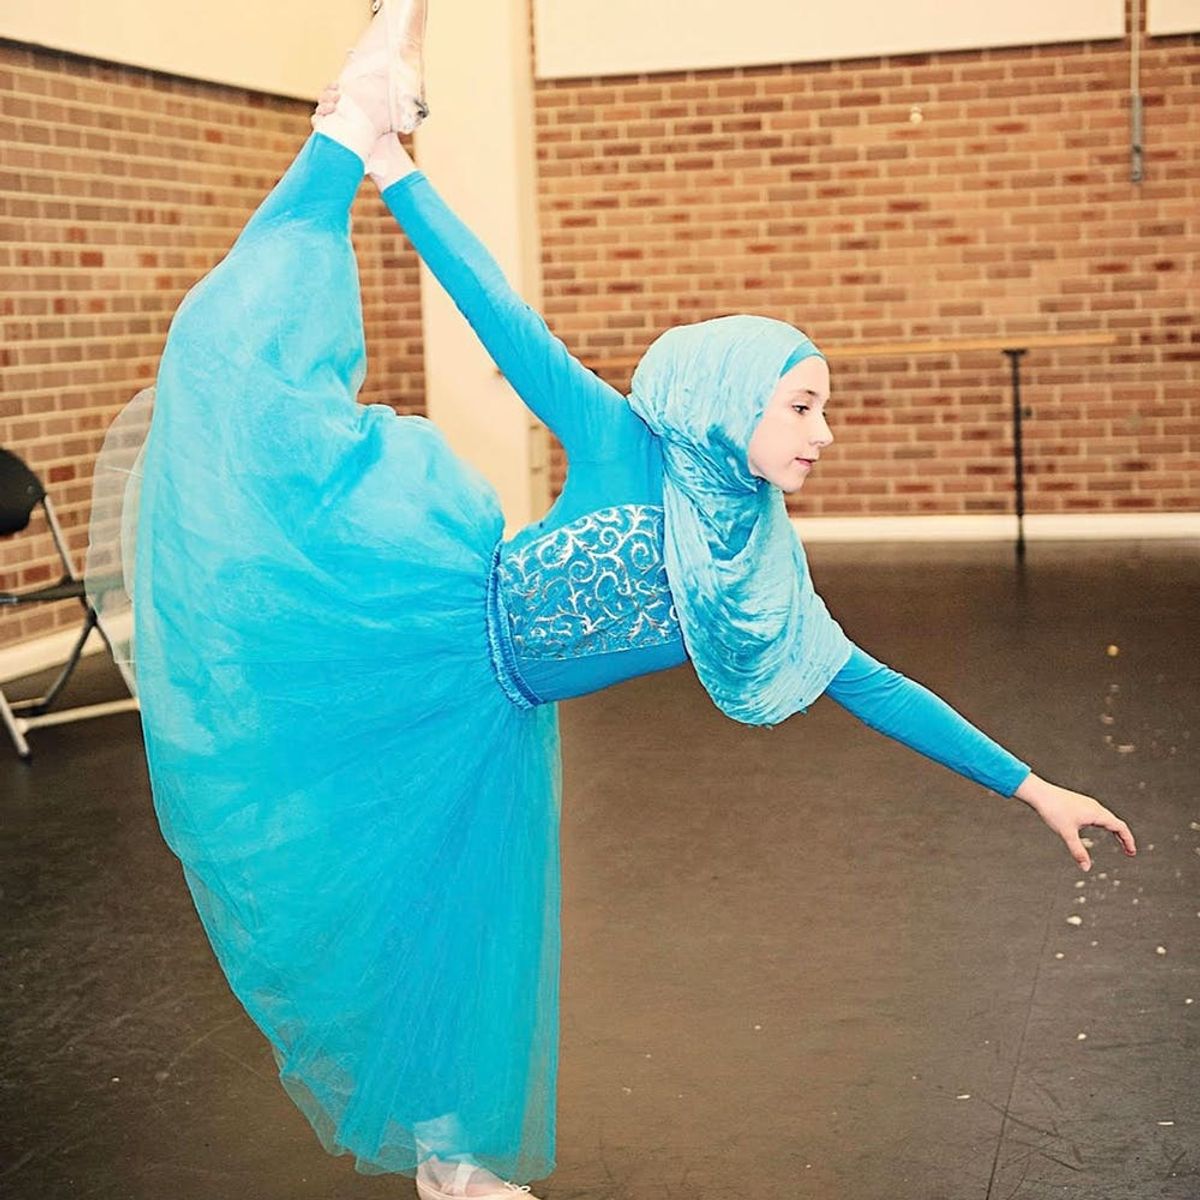 This Hijab-Wearing Ballerina Is About to Change the World